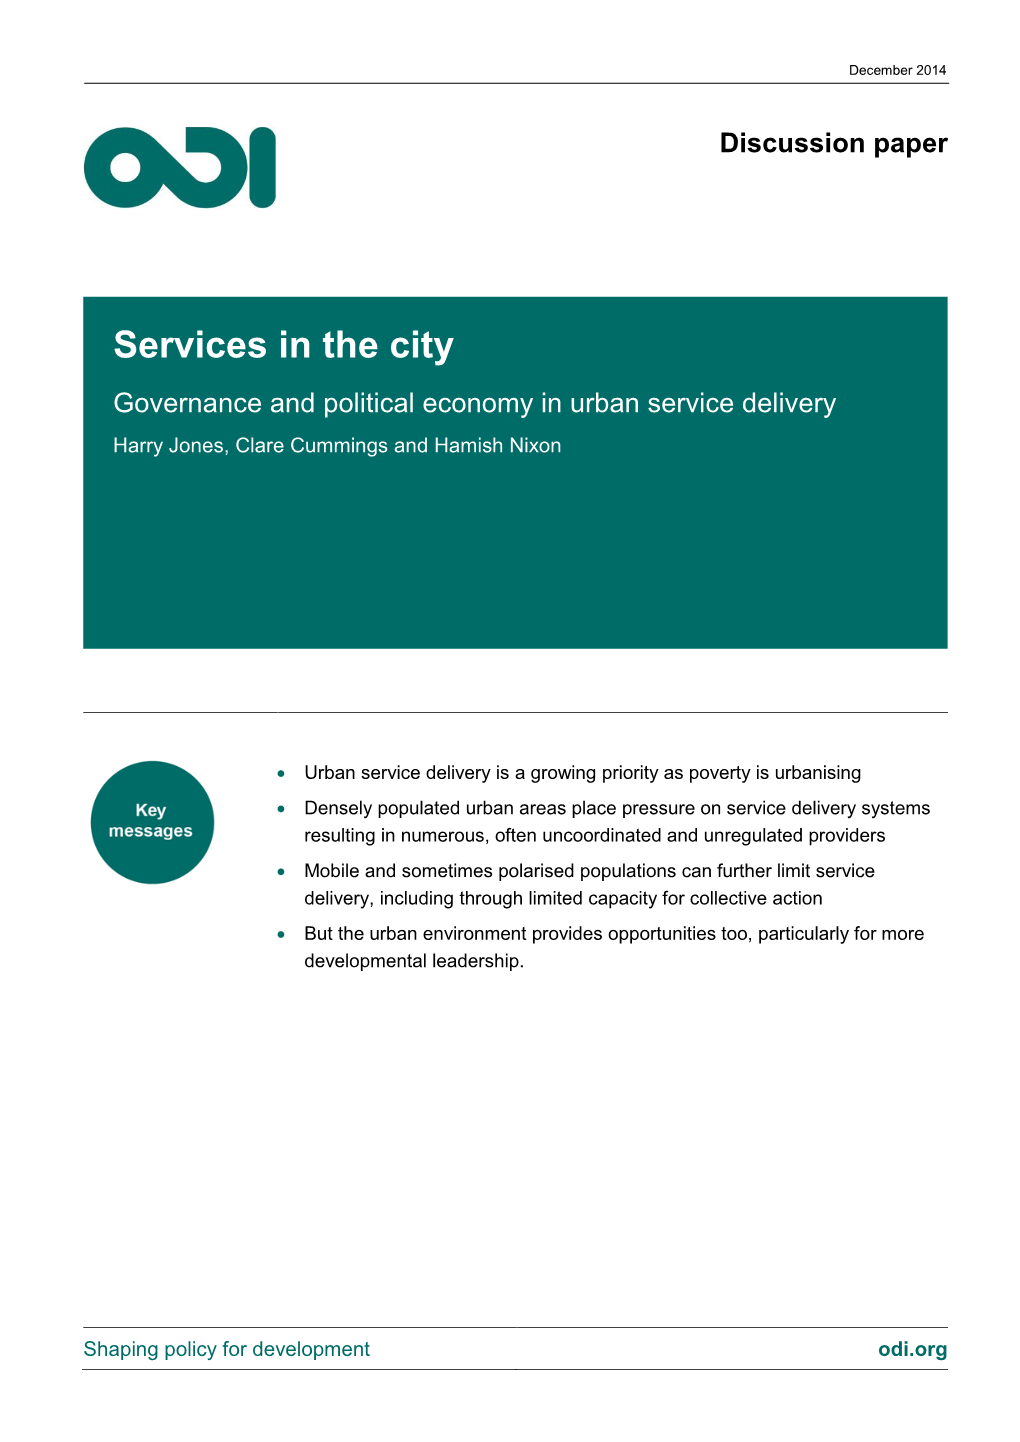 Services in the City Governance and Political Economy in Urban Service Delivery Harry Jones, Clare Cummings and Hamish Nixon